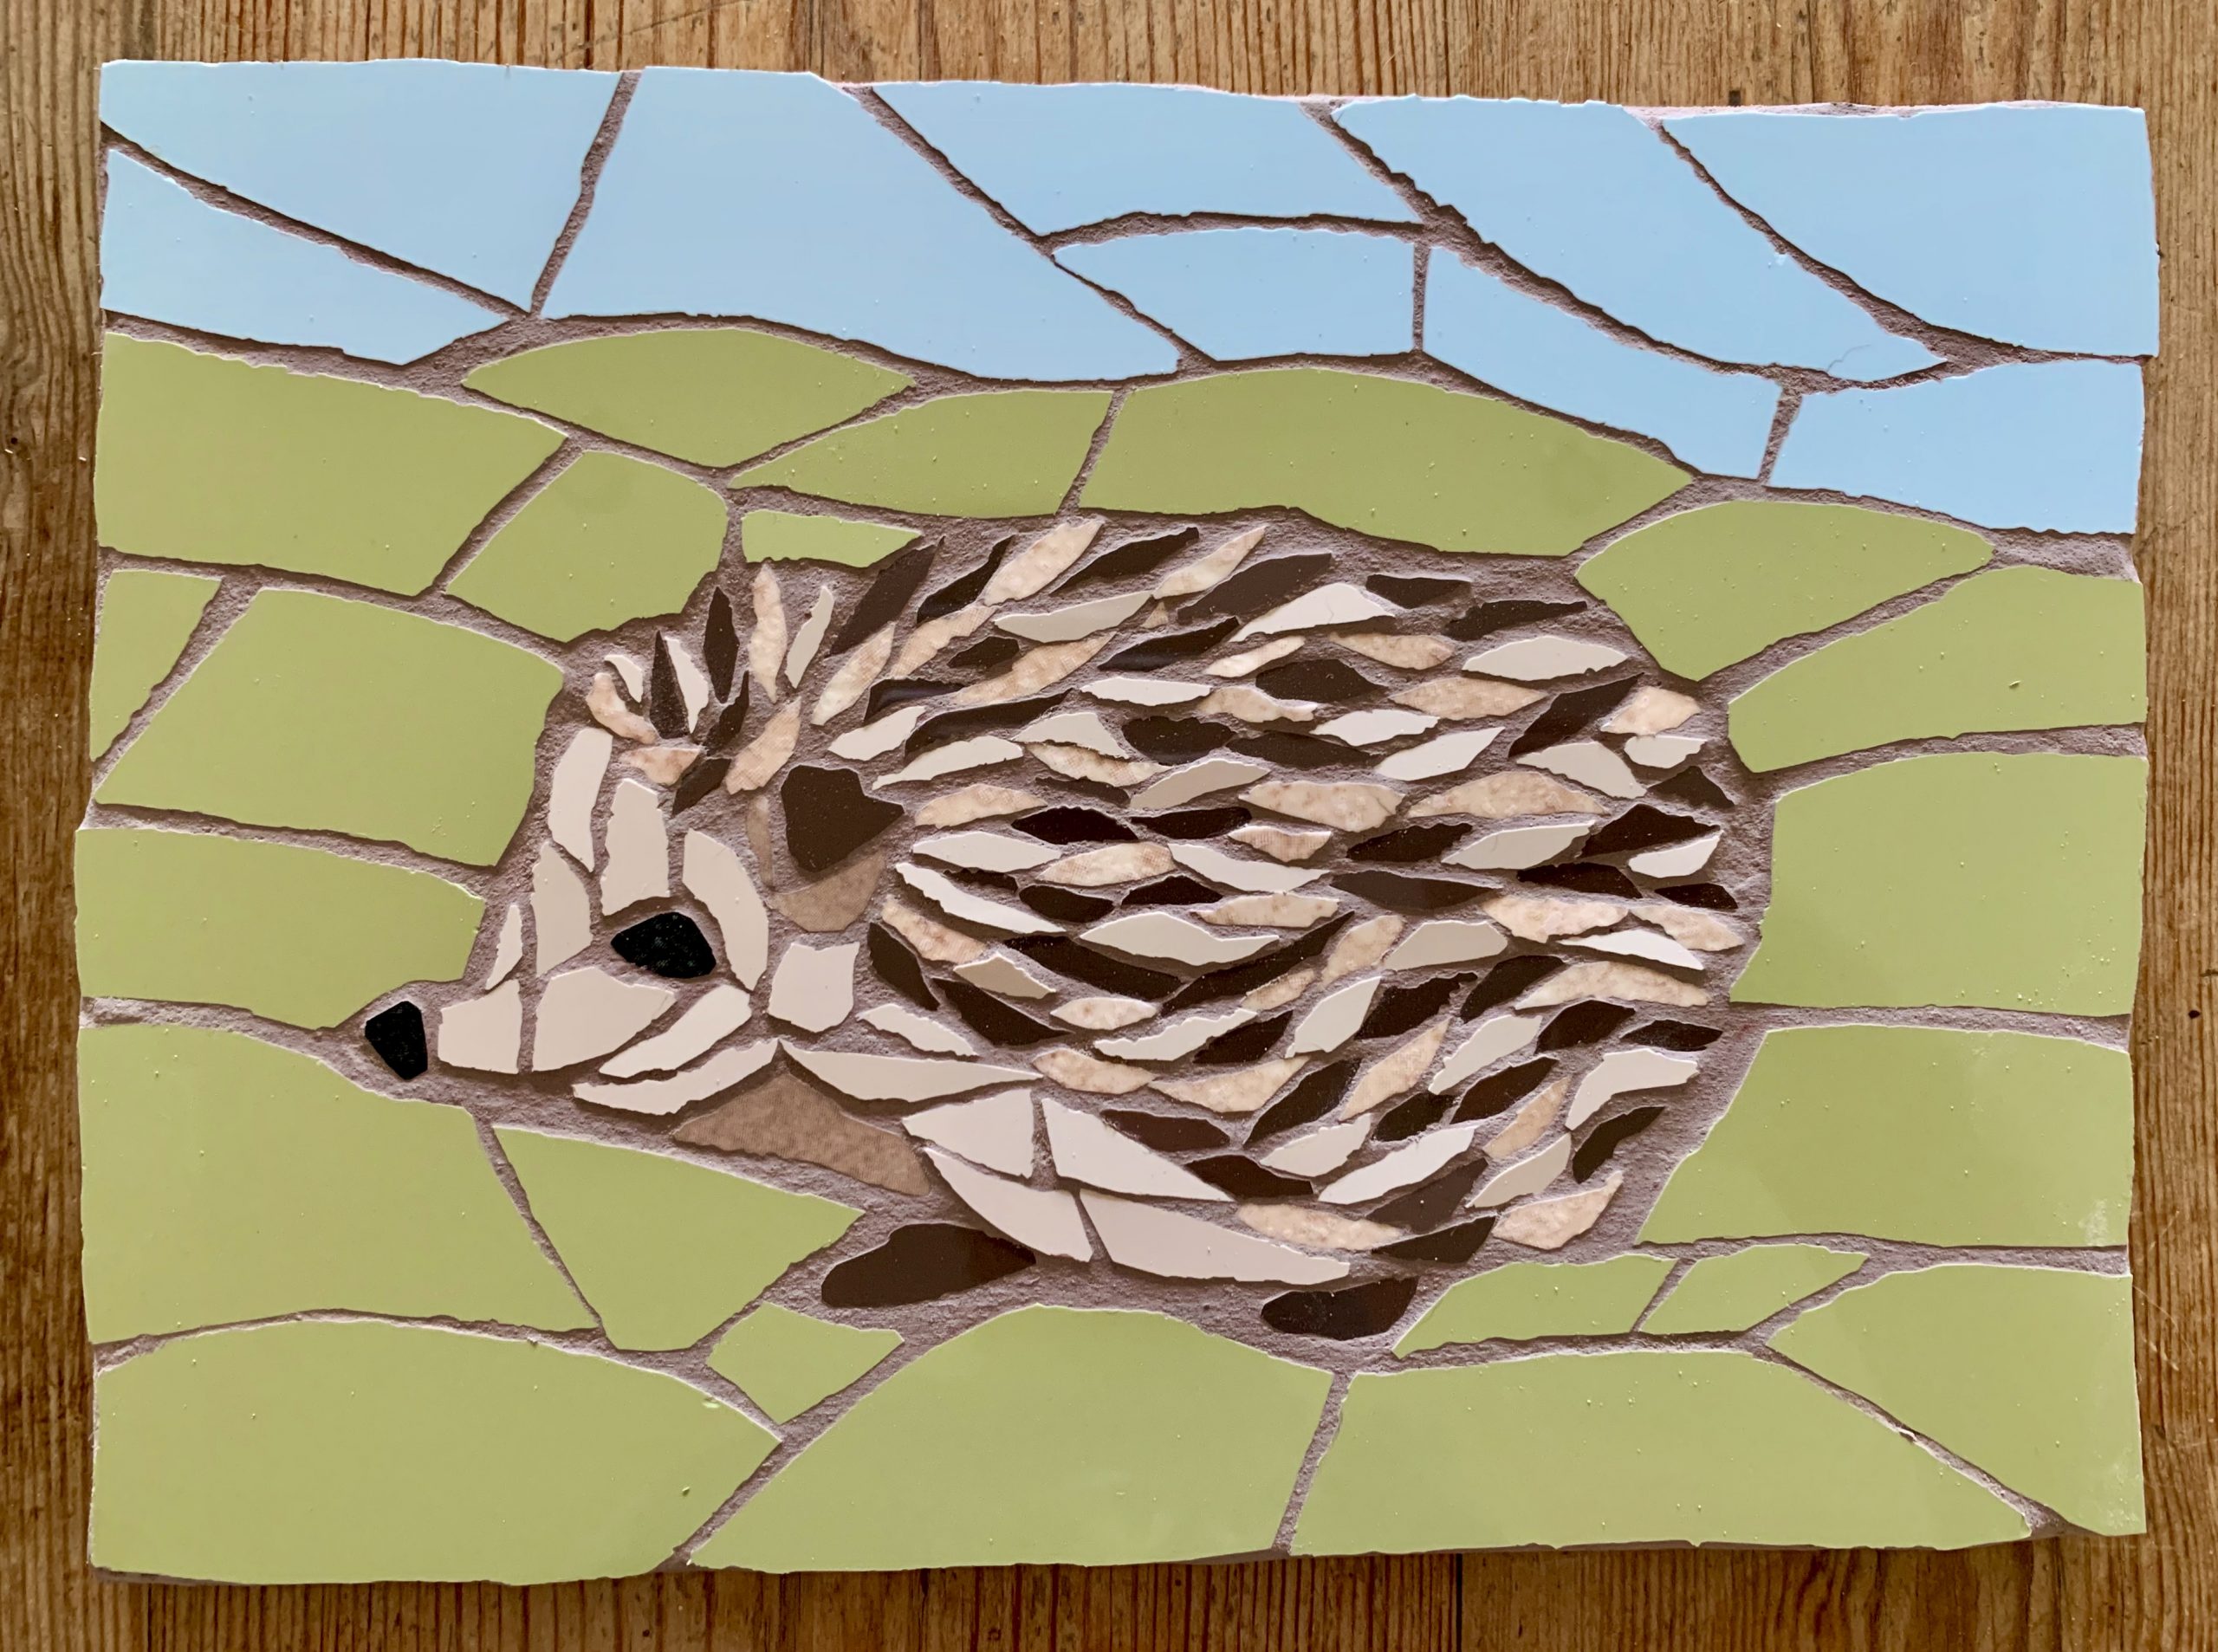 New mosaic hedgehog commission ready for his new home!